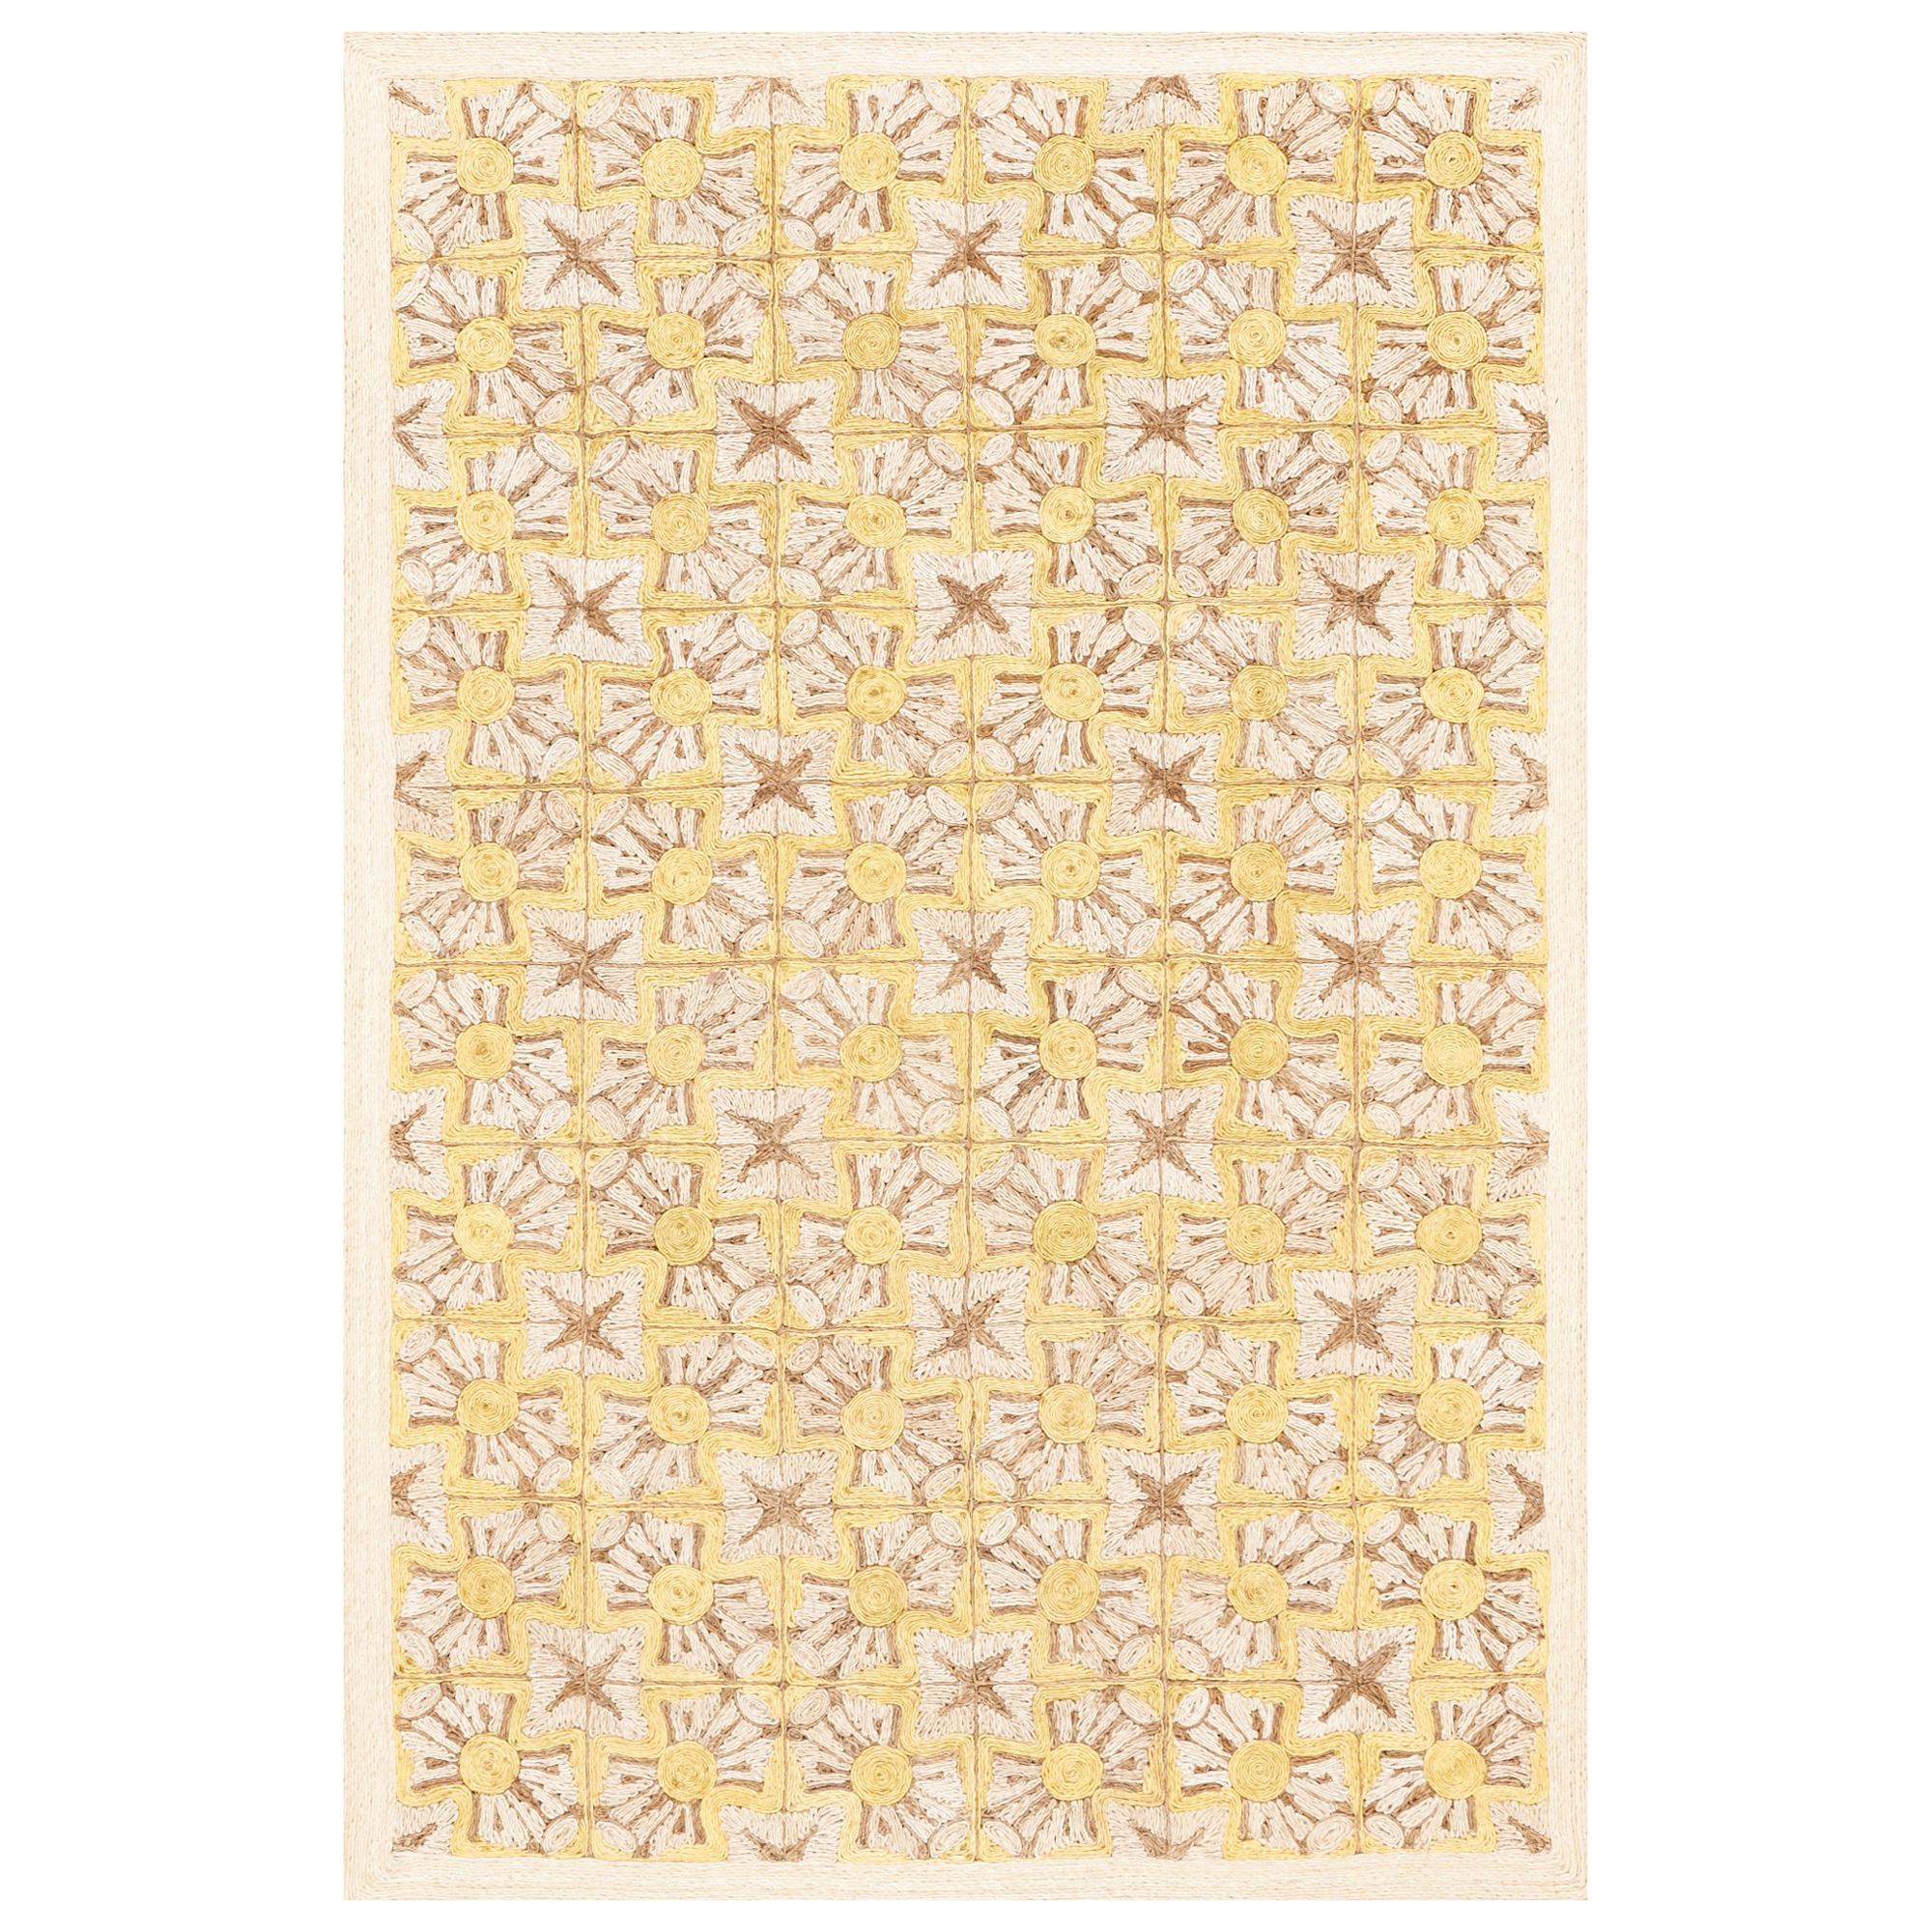 Schumacher Sintra Area Rug in Hand-Coiled Abaca by Patterson Flynn